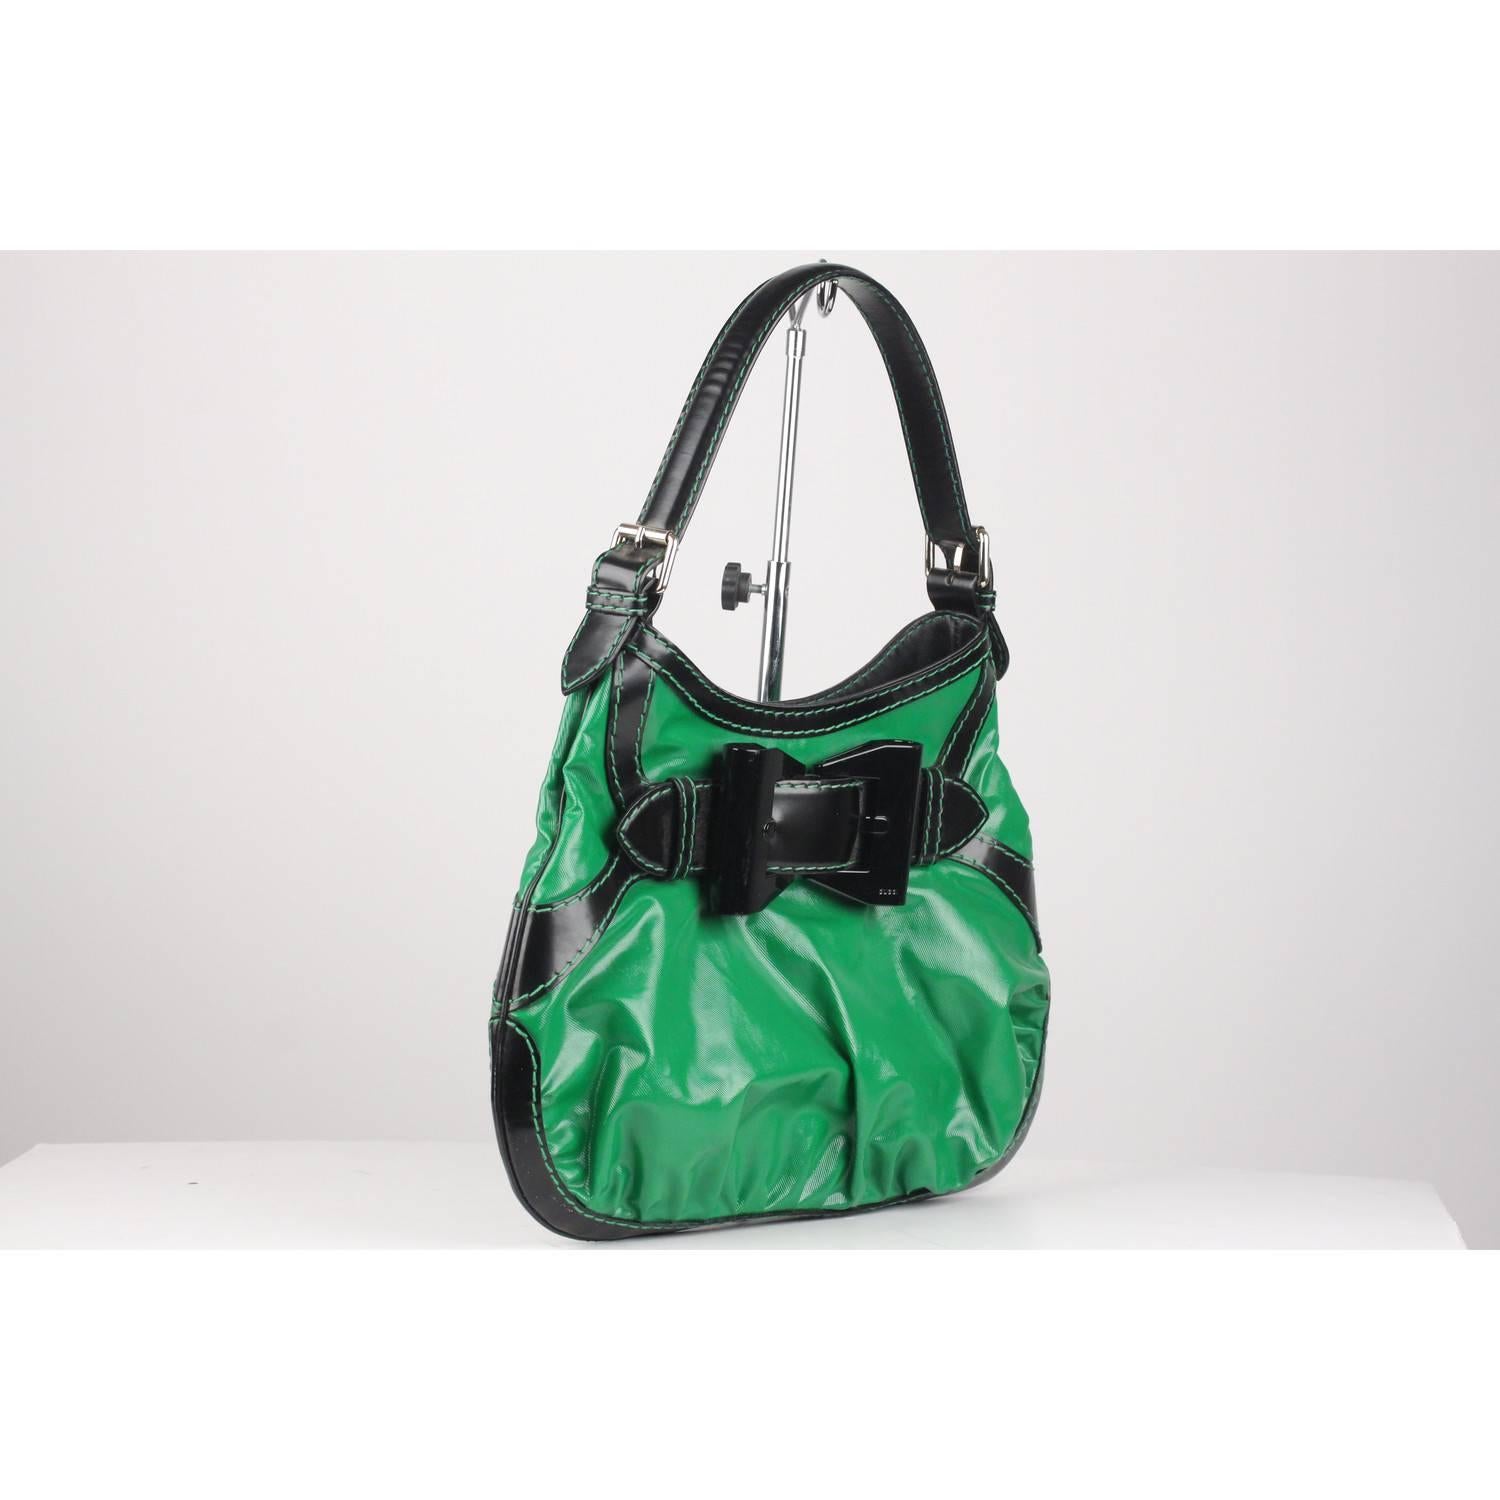 - Gucci 'Queen' Hobo Dialux Coated Canvas
- Crafted from green coated canvas with contrast black leather trim
- Oversized bow lucite buckle on the front
- Single loop leather handle
- Gold Tone hardware
- Magnetic button closure on top
- Gucci